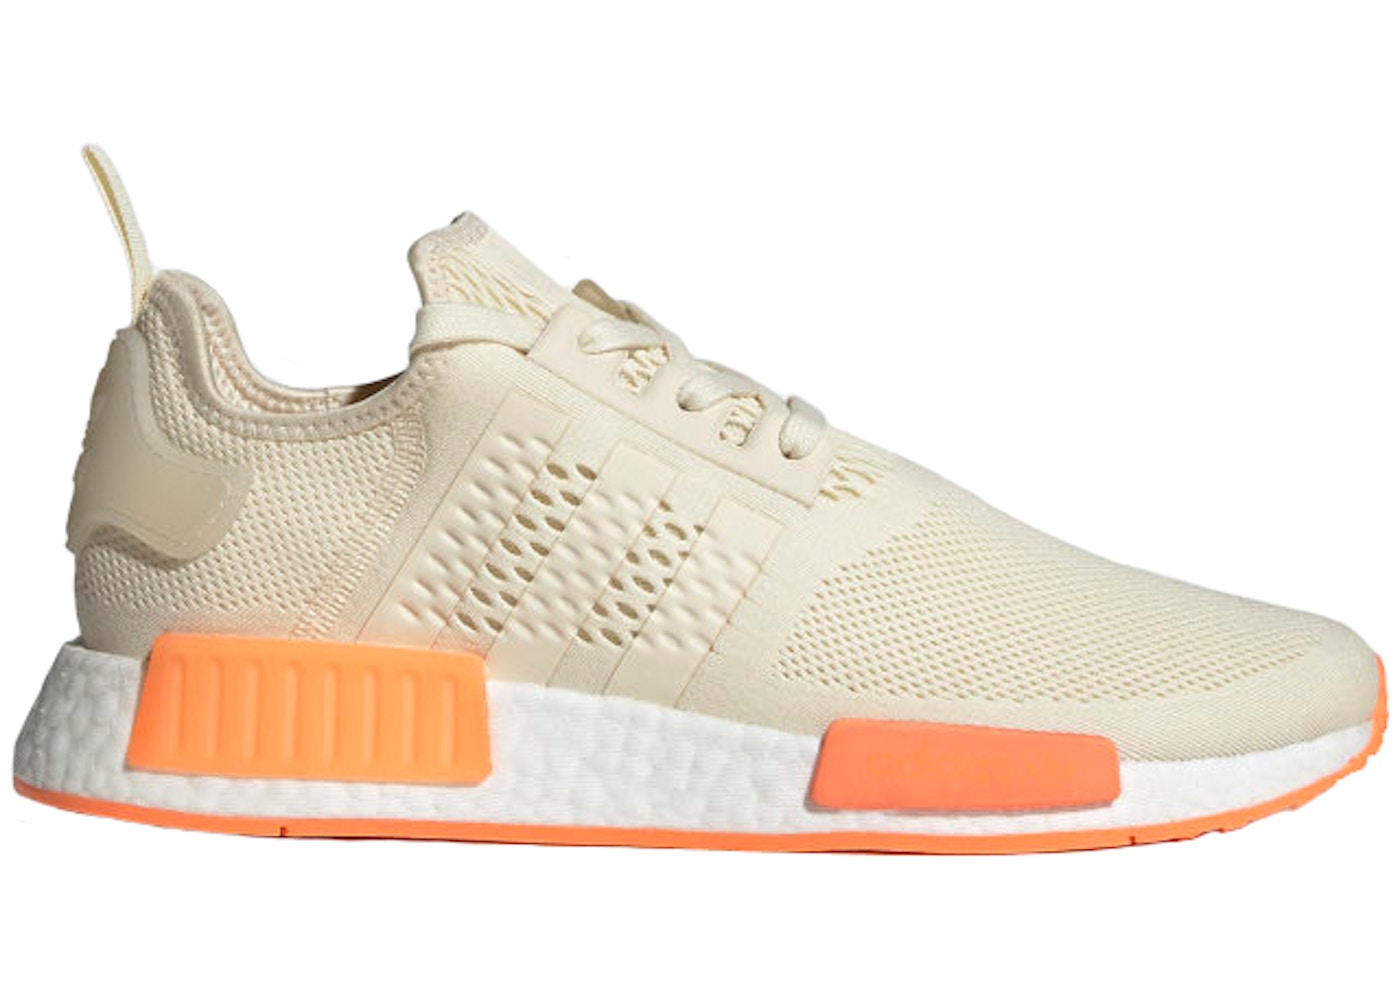 discolor myndighed passage adidas NMD R1 Cream White Screaming Orange - FY5984